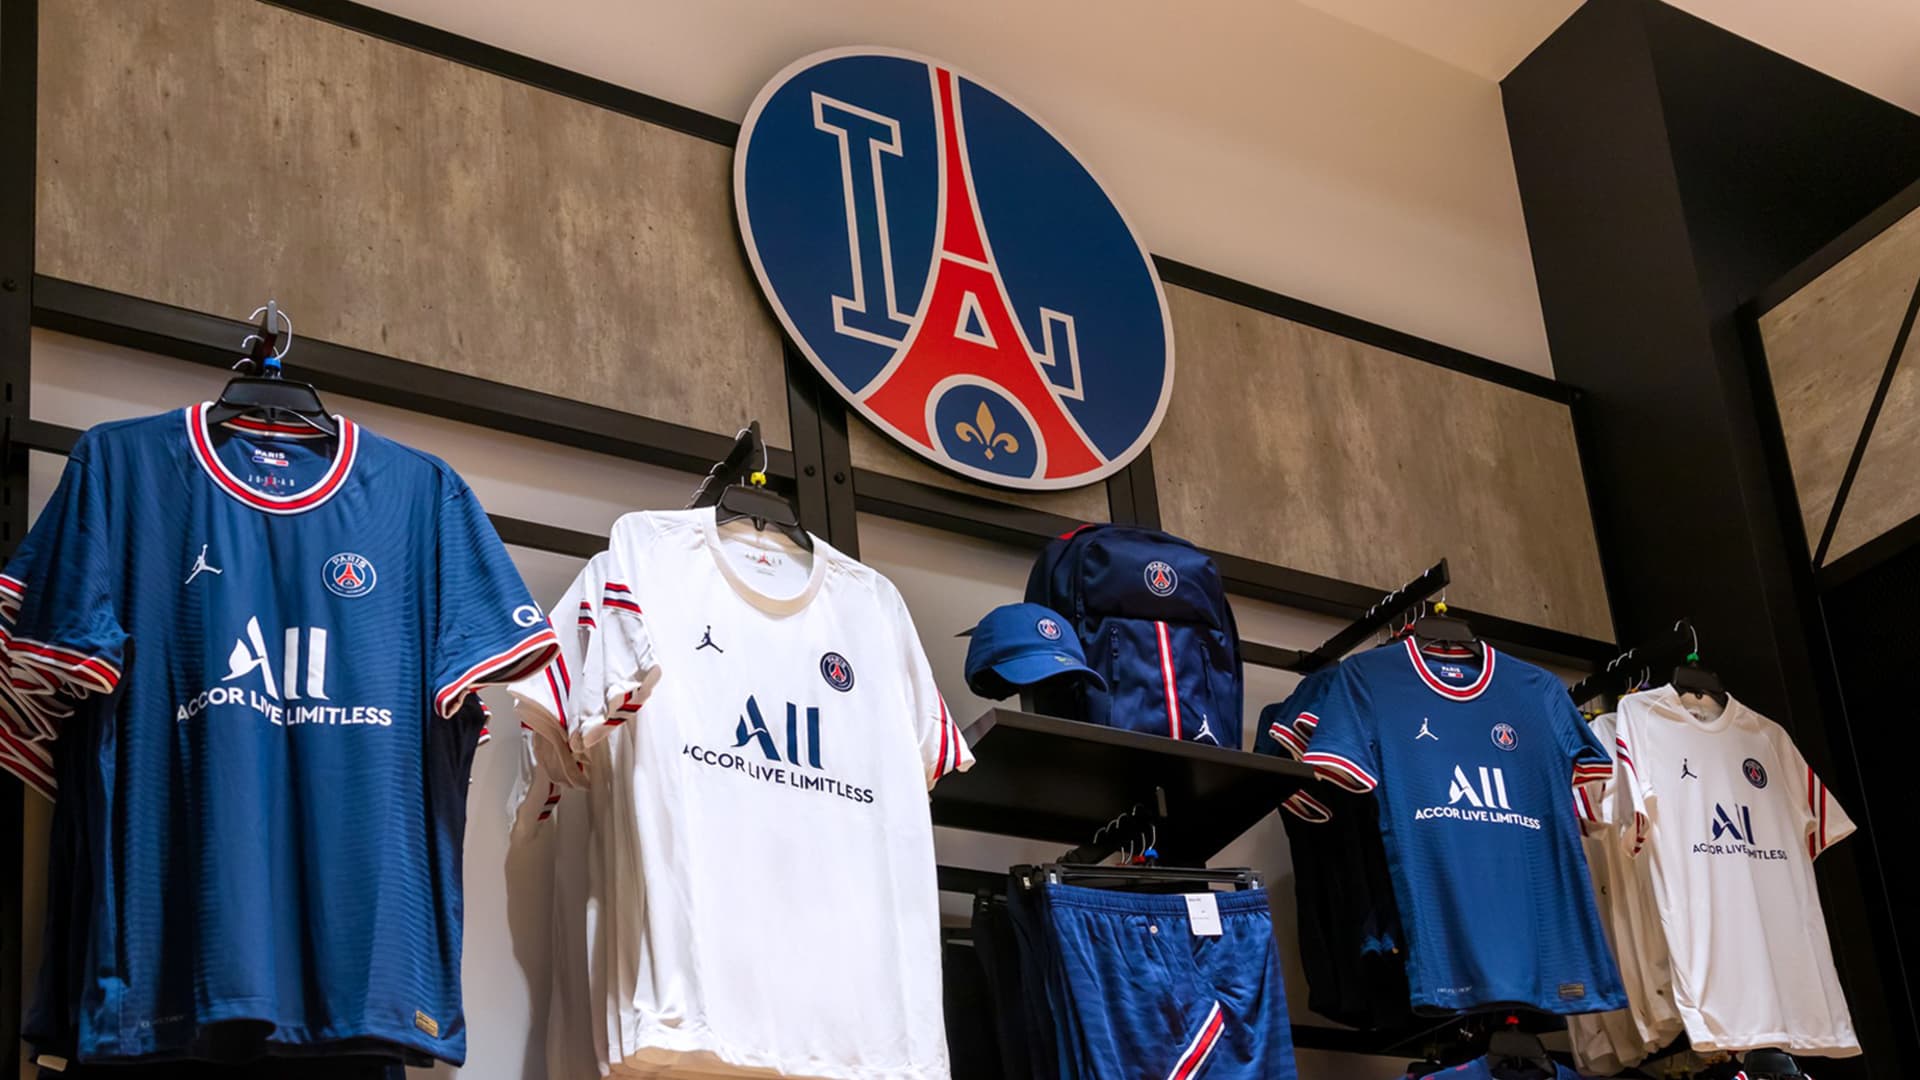 Paris Saint-Germain Football Club store which Fanatics is opening in Los Angeles.